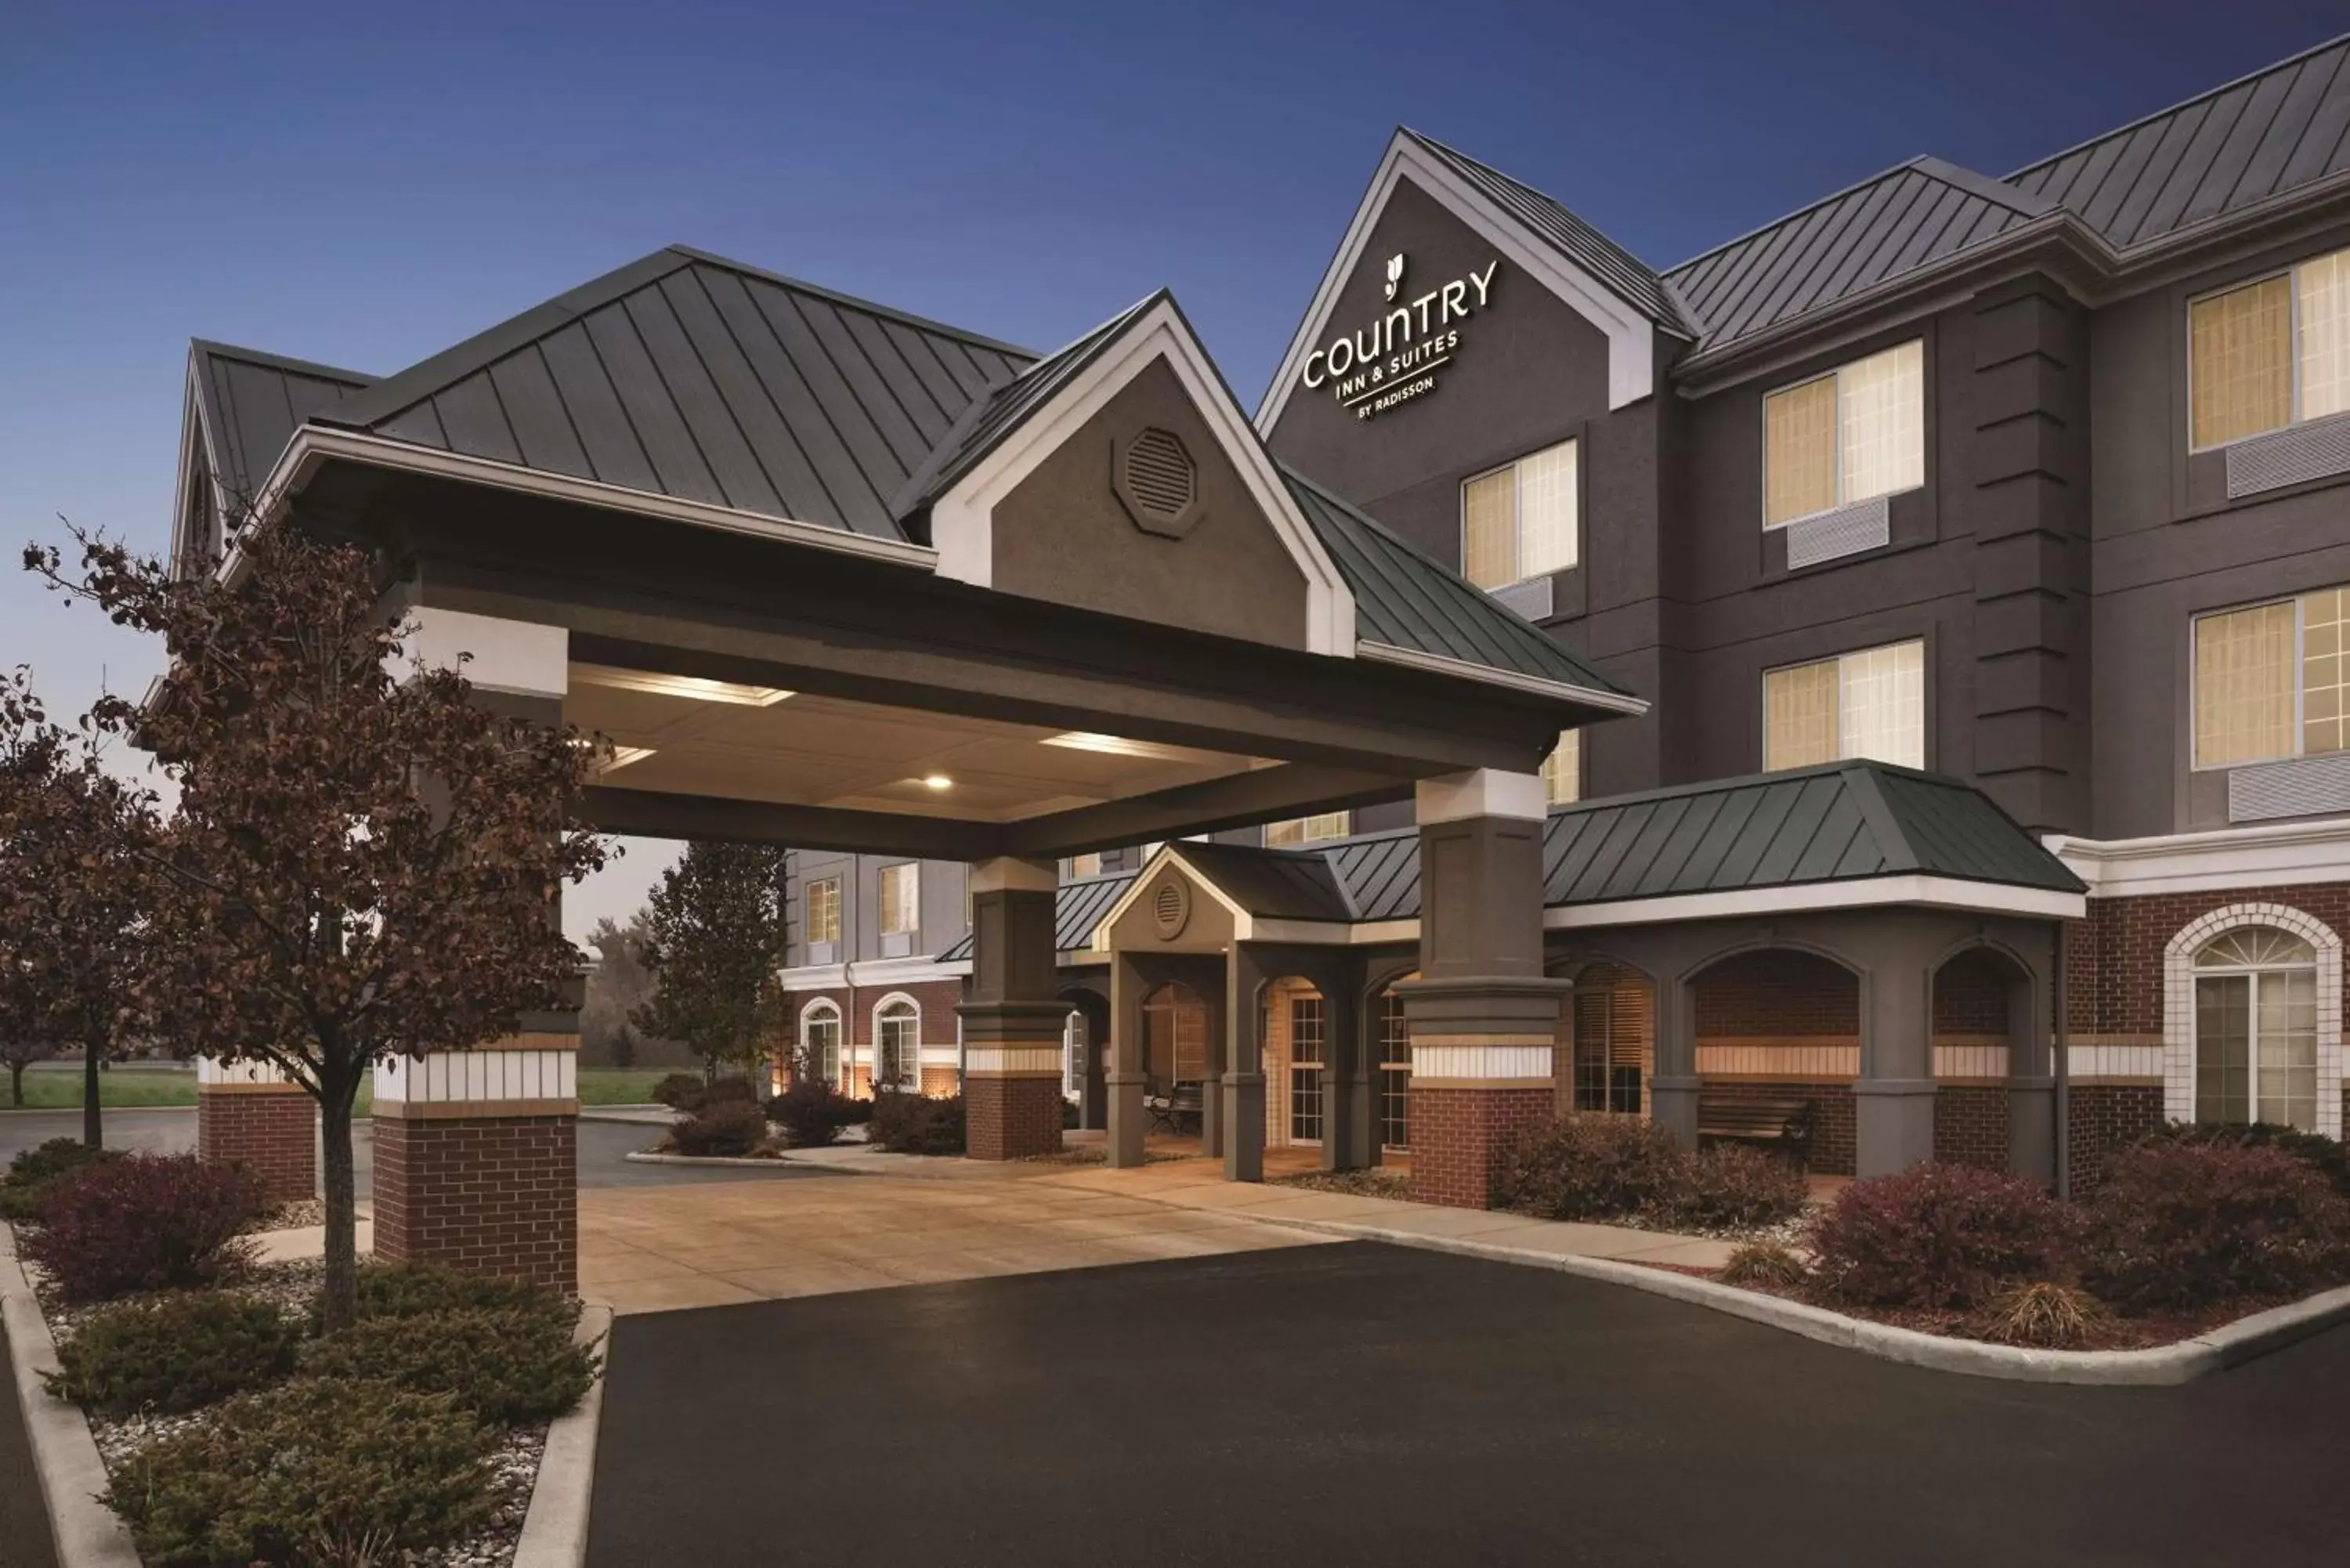 Property Building in Country Inn & Suites by Radisson, Michigan City, IN